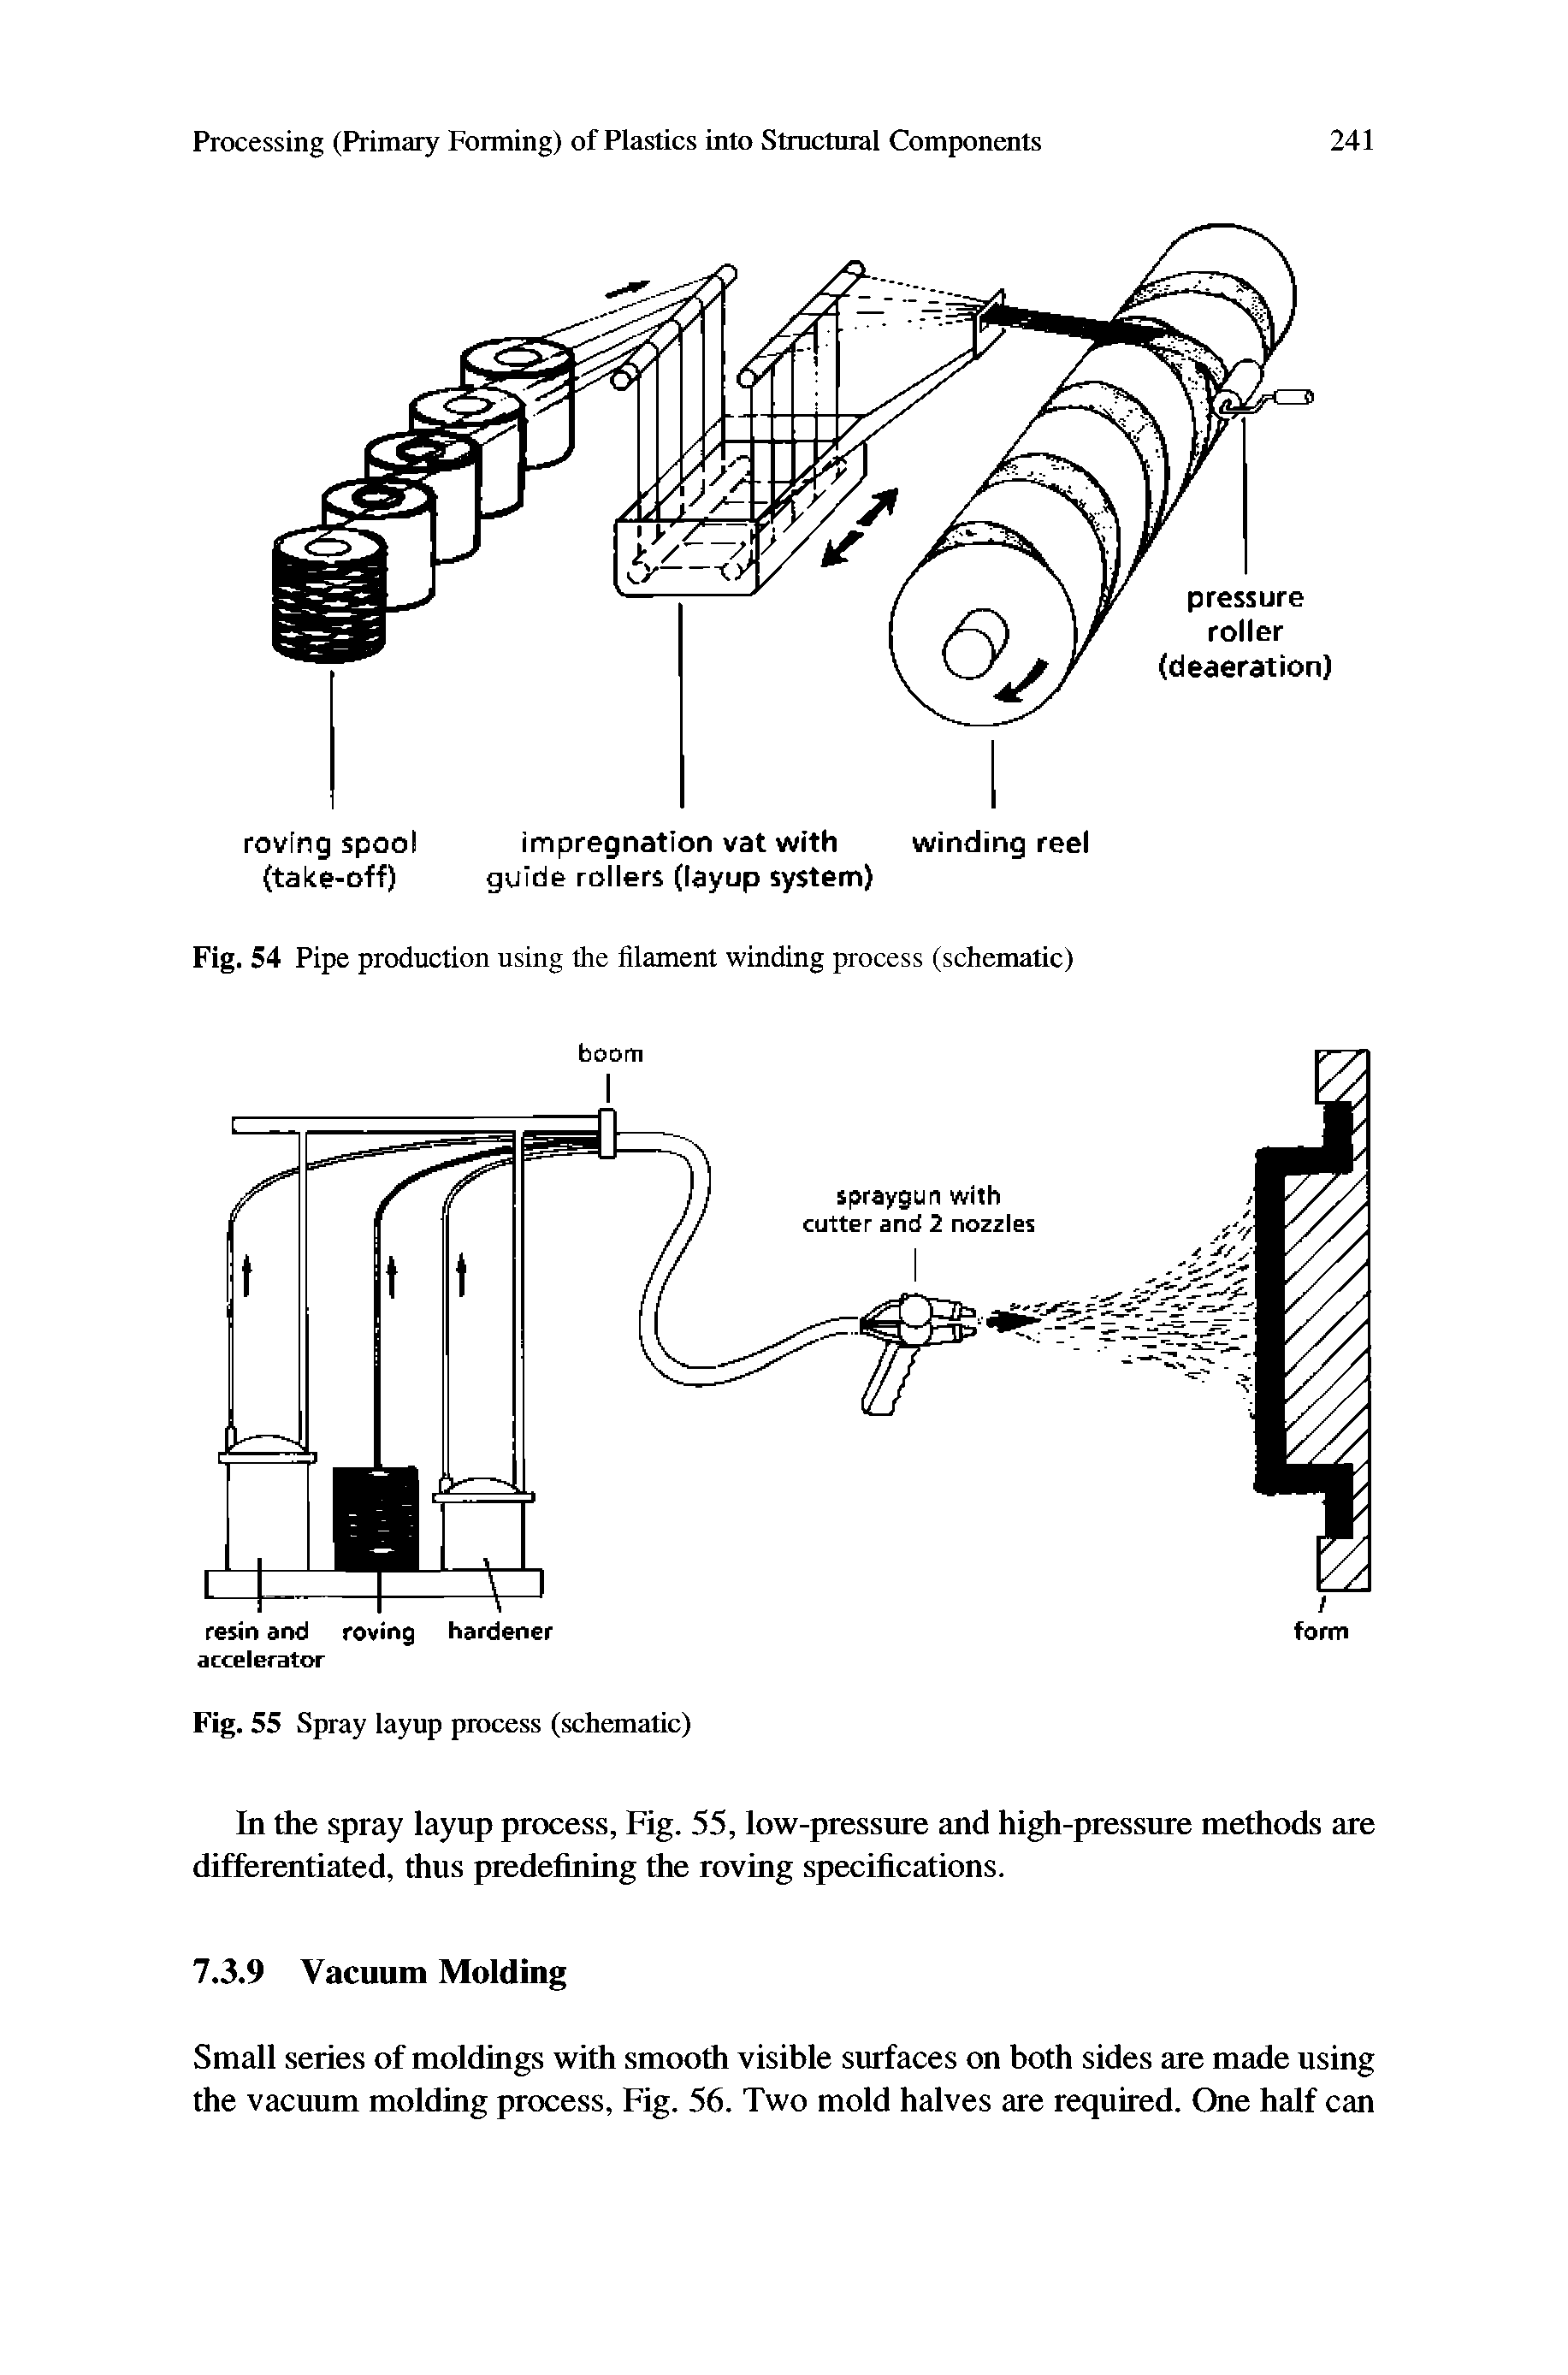 Fig. 54 Pipe production using the filament winding process (schematic)...